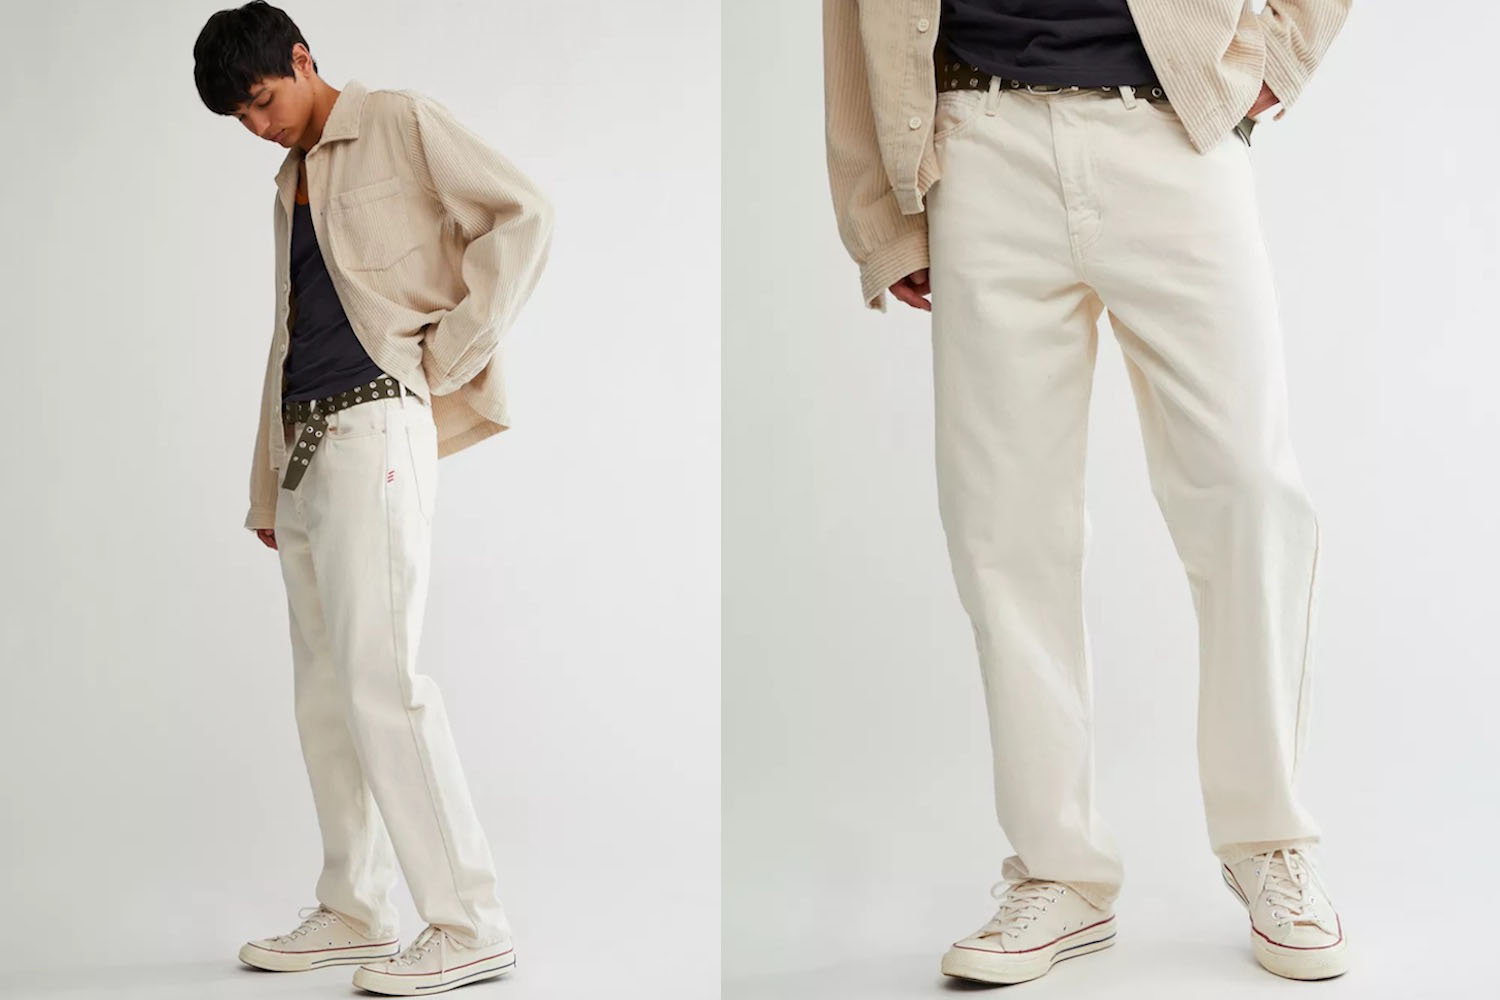 two model shots of the BDG white vintage jeans